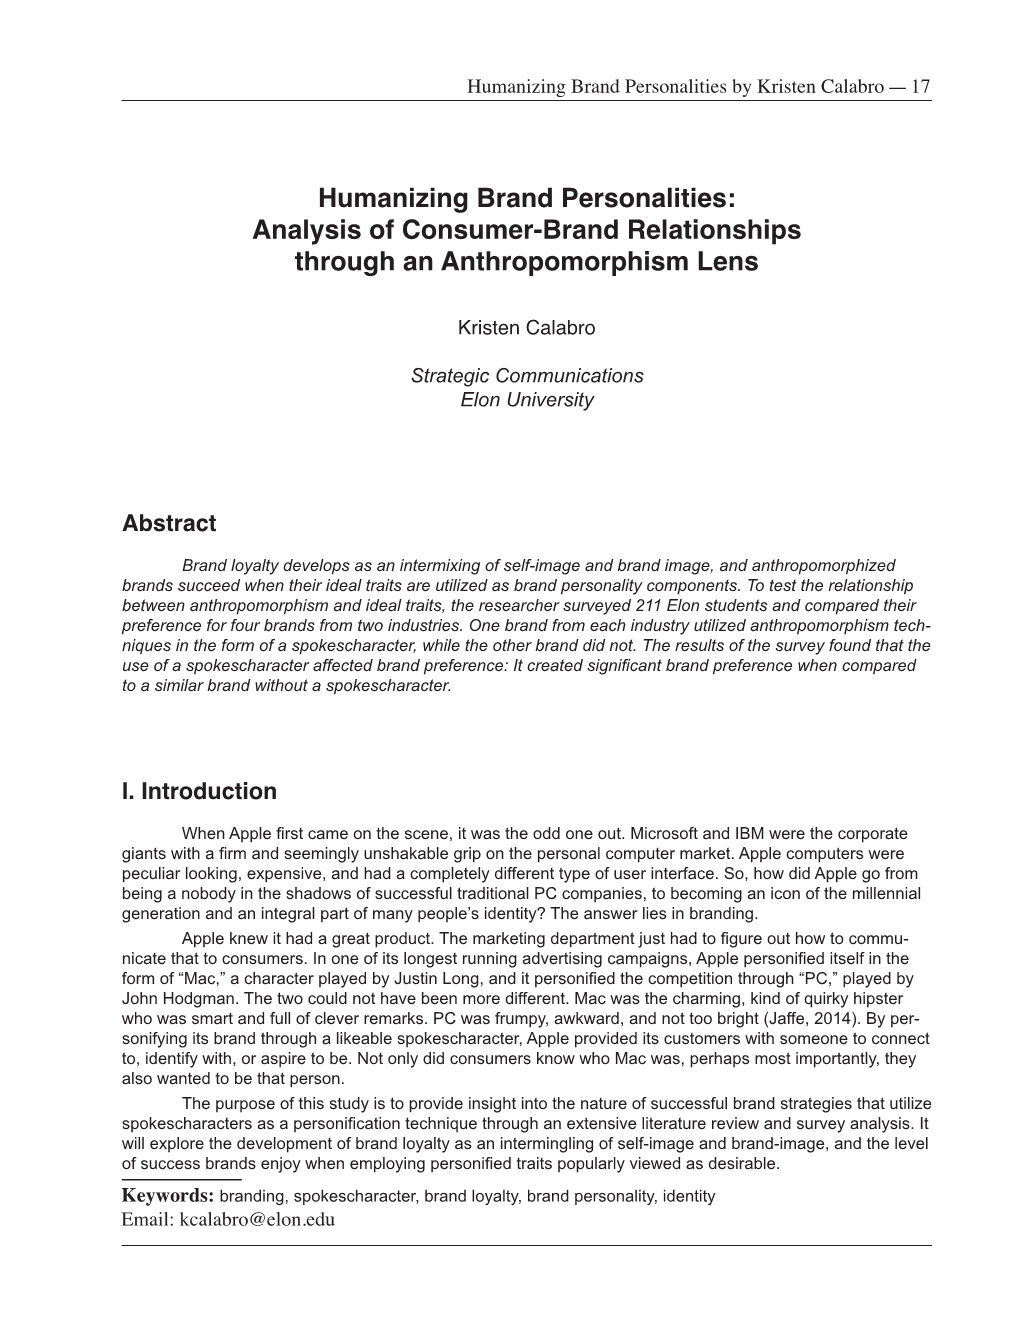 Humanizing Brand Personalities: Analysis of Consumer-Brand Relationships Through an Anthropomorphism Lens